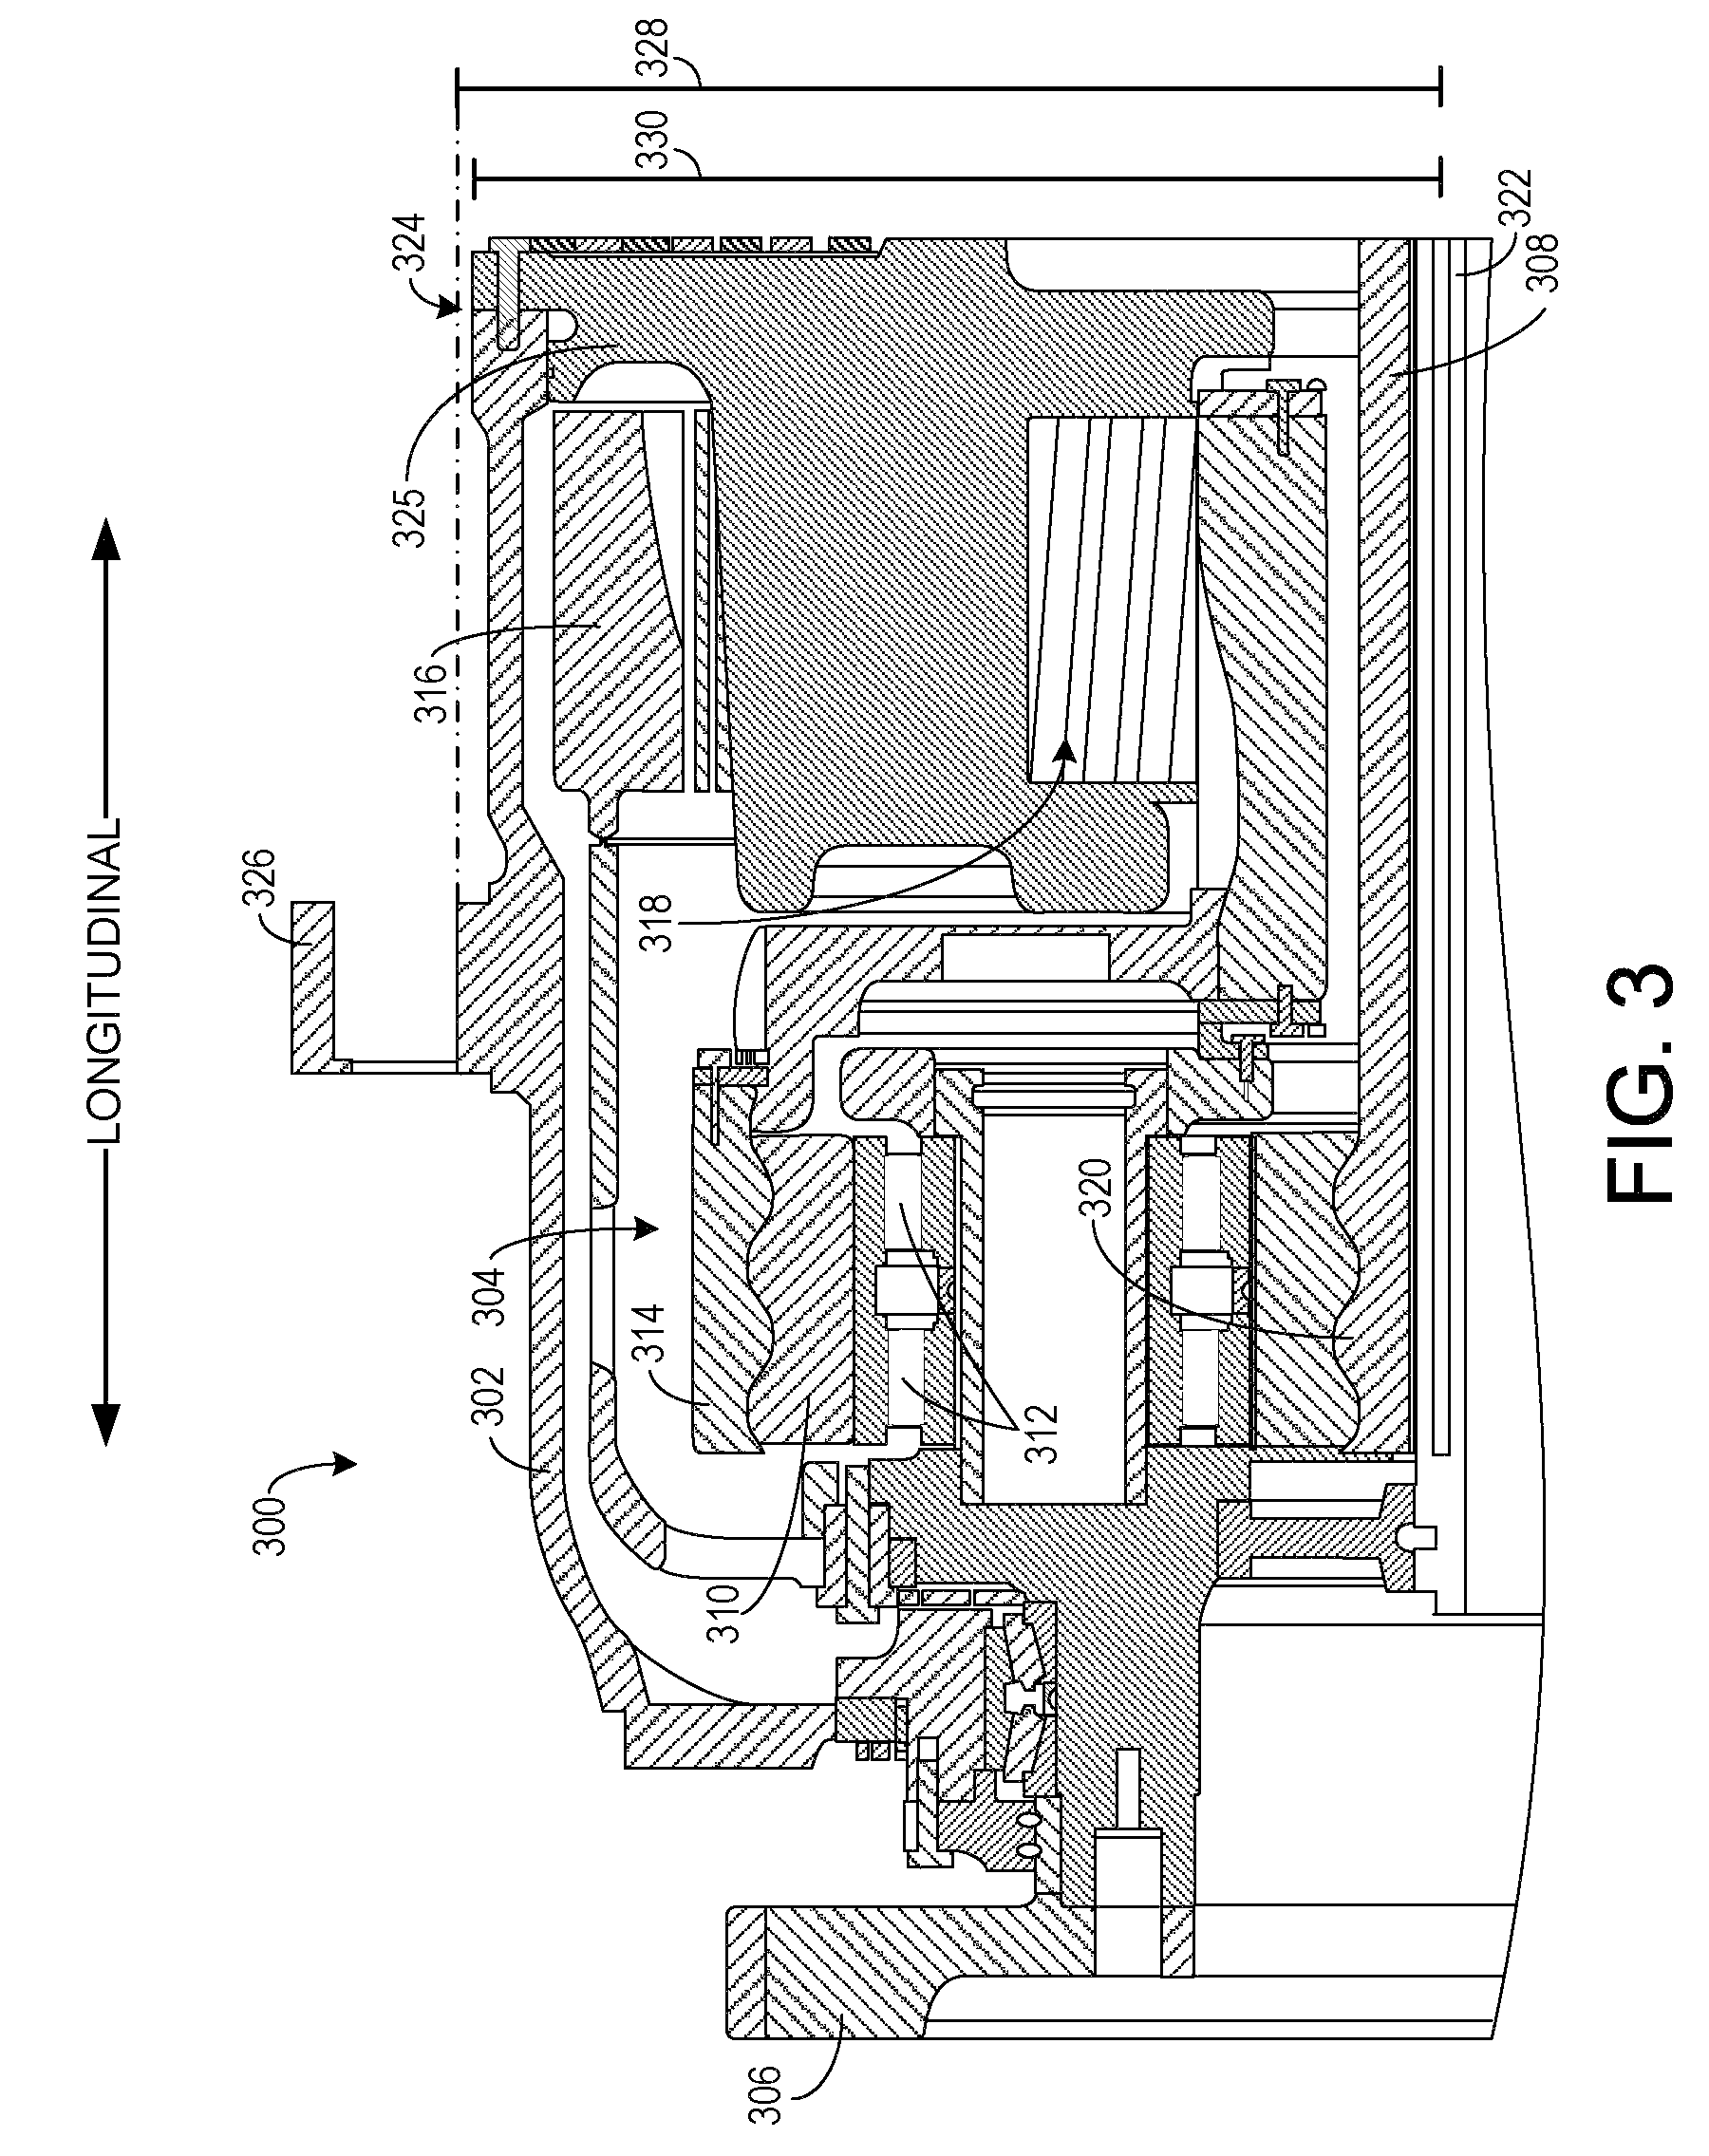 Transmission and power generation system having torque reacting joint